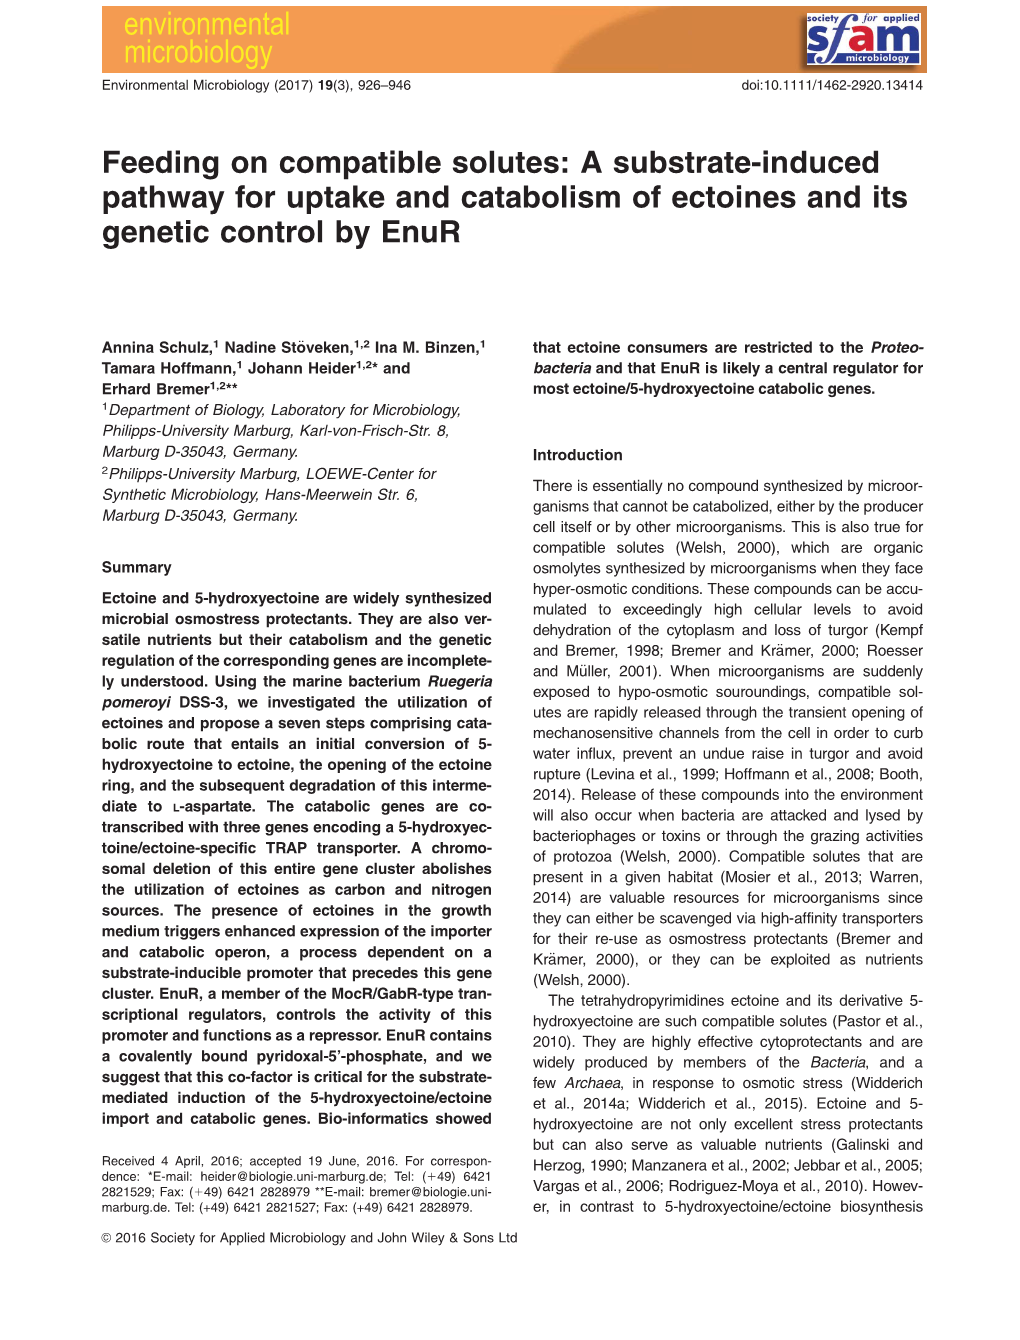 A Substrate-Induced Pathway for Uptake and Catabolism of Ectoines and Its Genetic Control by Enur